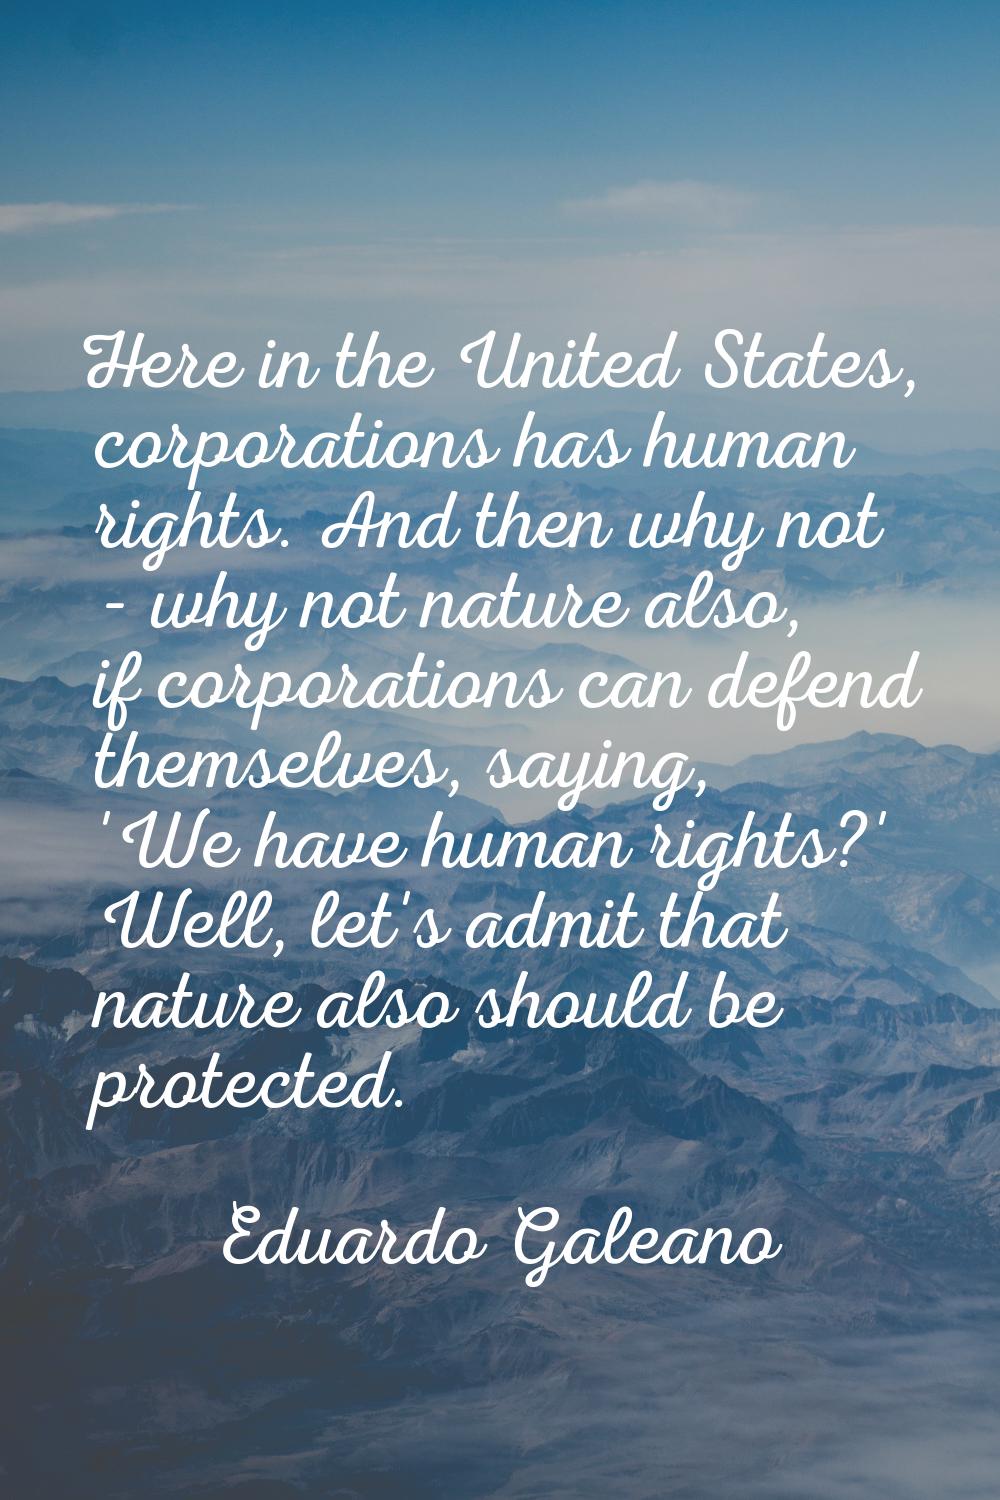 Here in the United States, corporations has human rights. And then why not - why not nature also, i